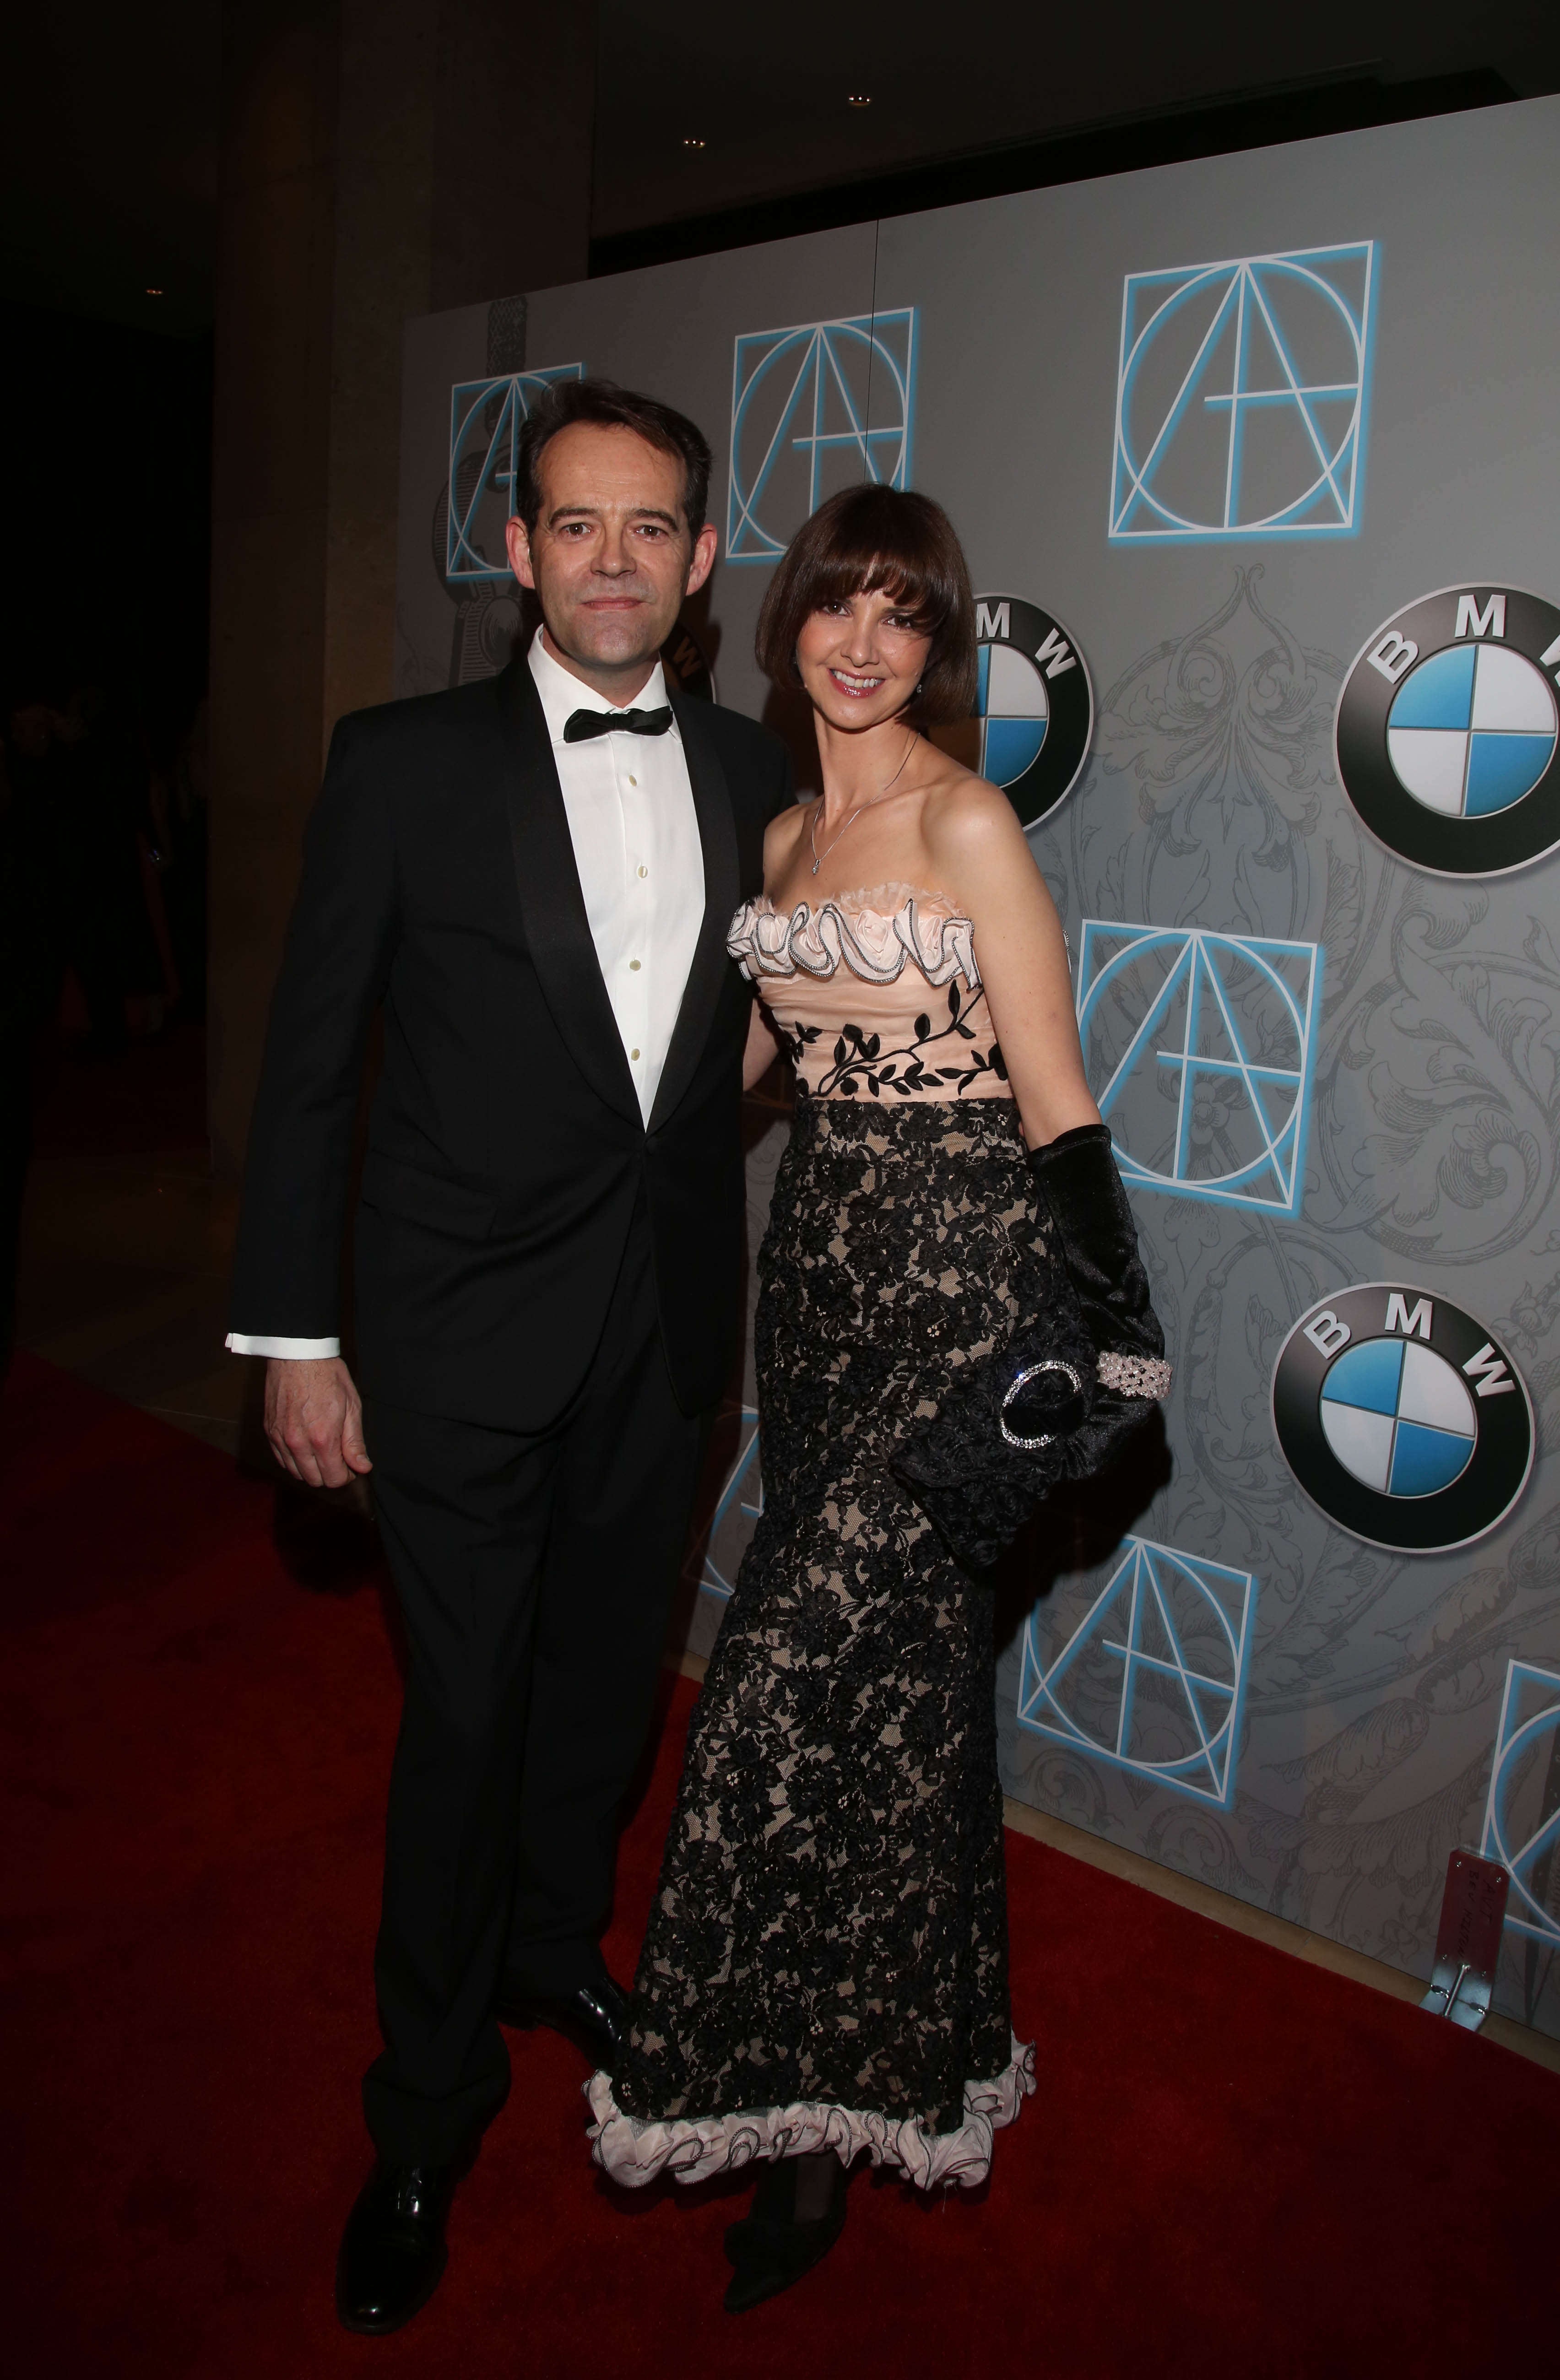 Giles Masters and Mia Christou attend the Art Directors Guild Awards, 2013, at The Beverly Hilton Hotel, Beverly Hills, CA.